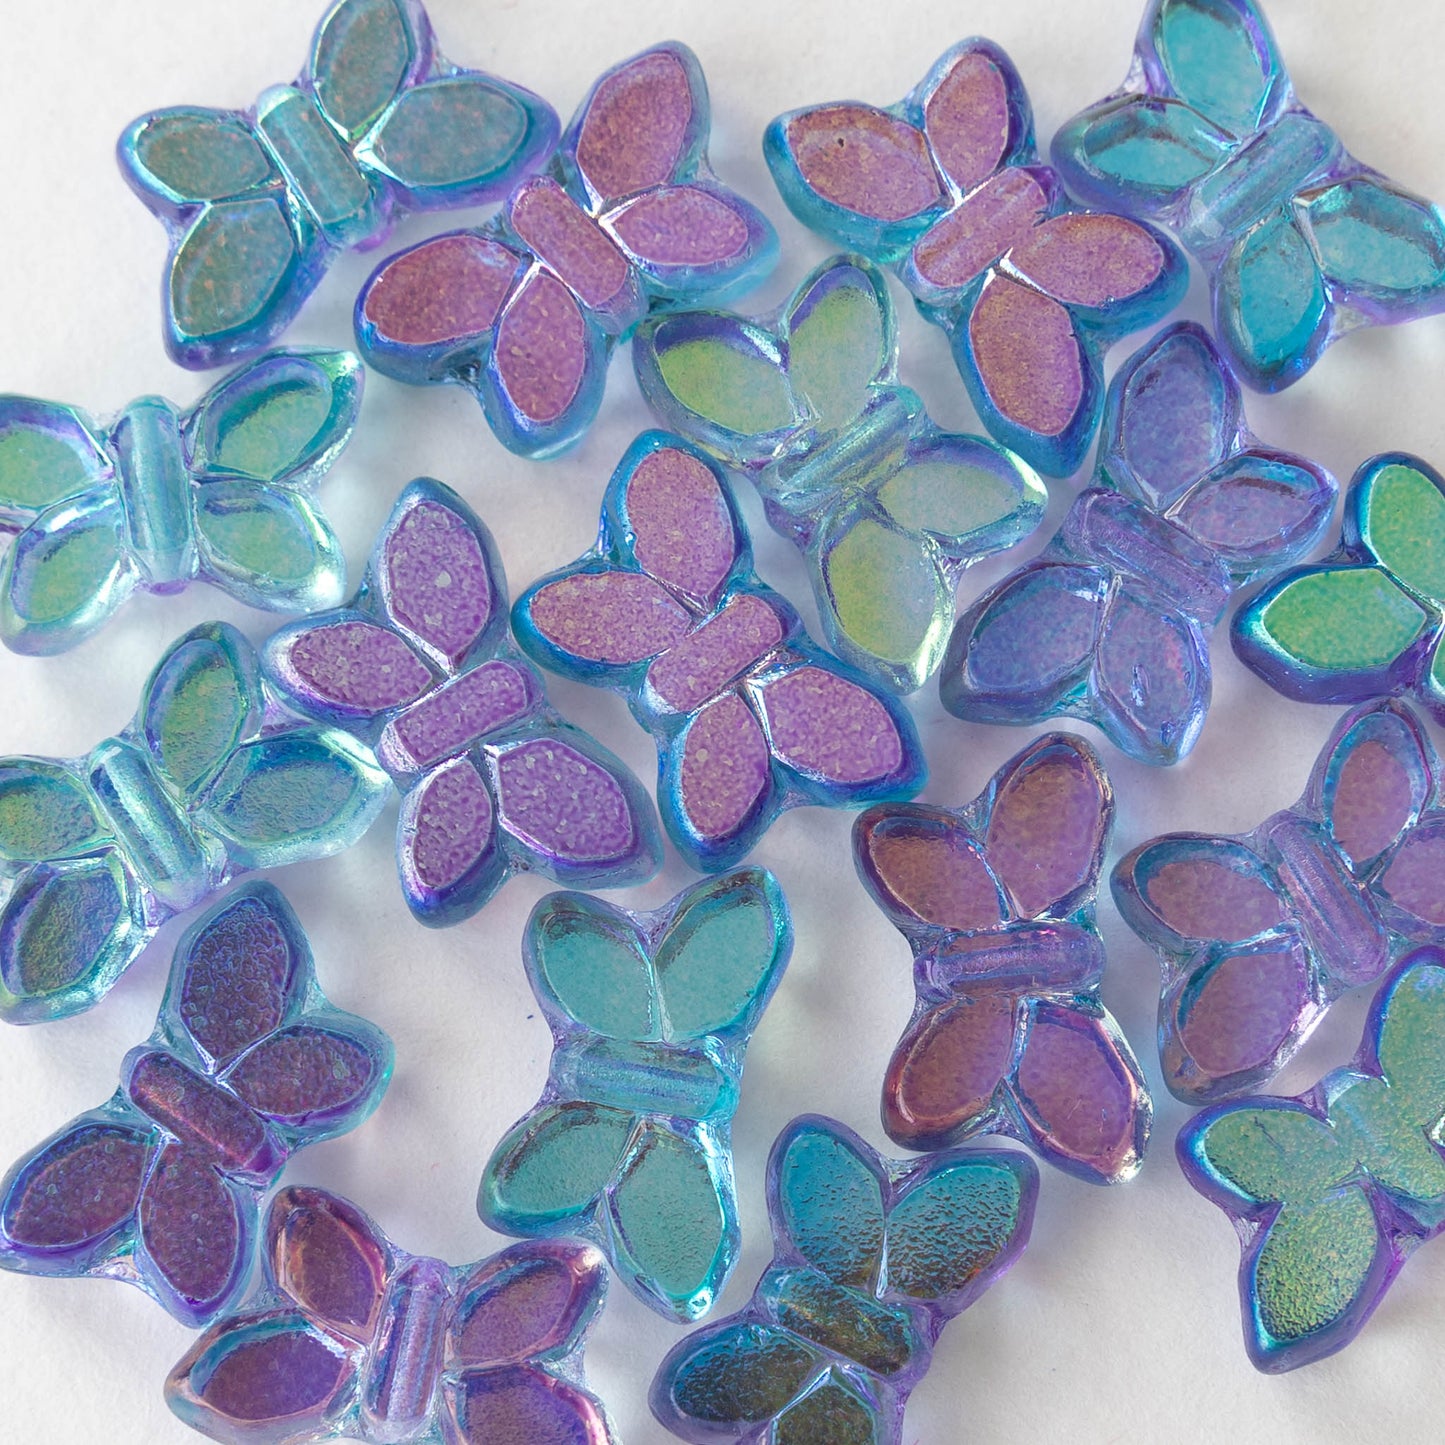 12x20mm Table Cut Butterfly Beads - Reflective Light Blue and Lavender - 4 or 12